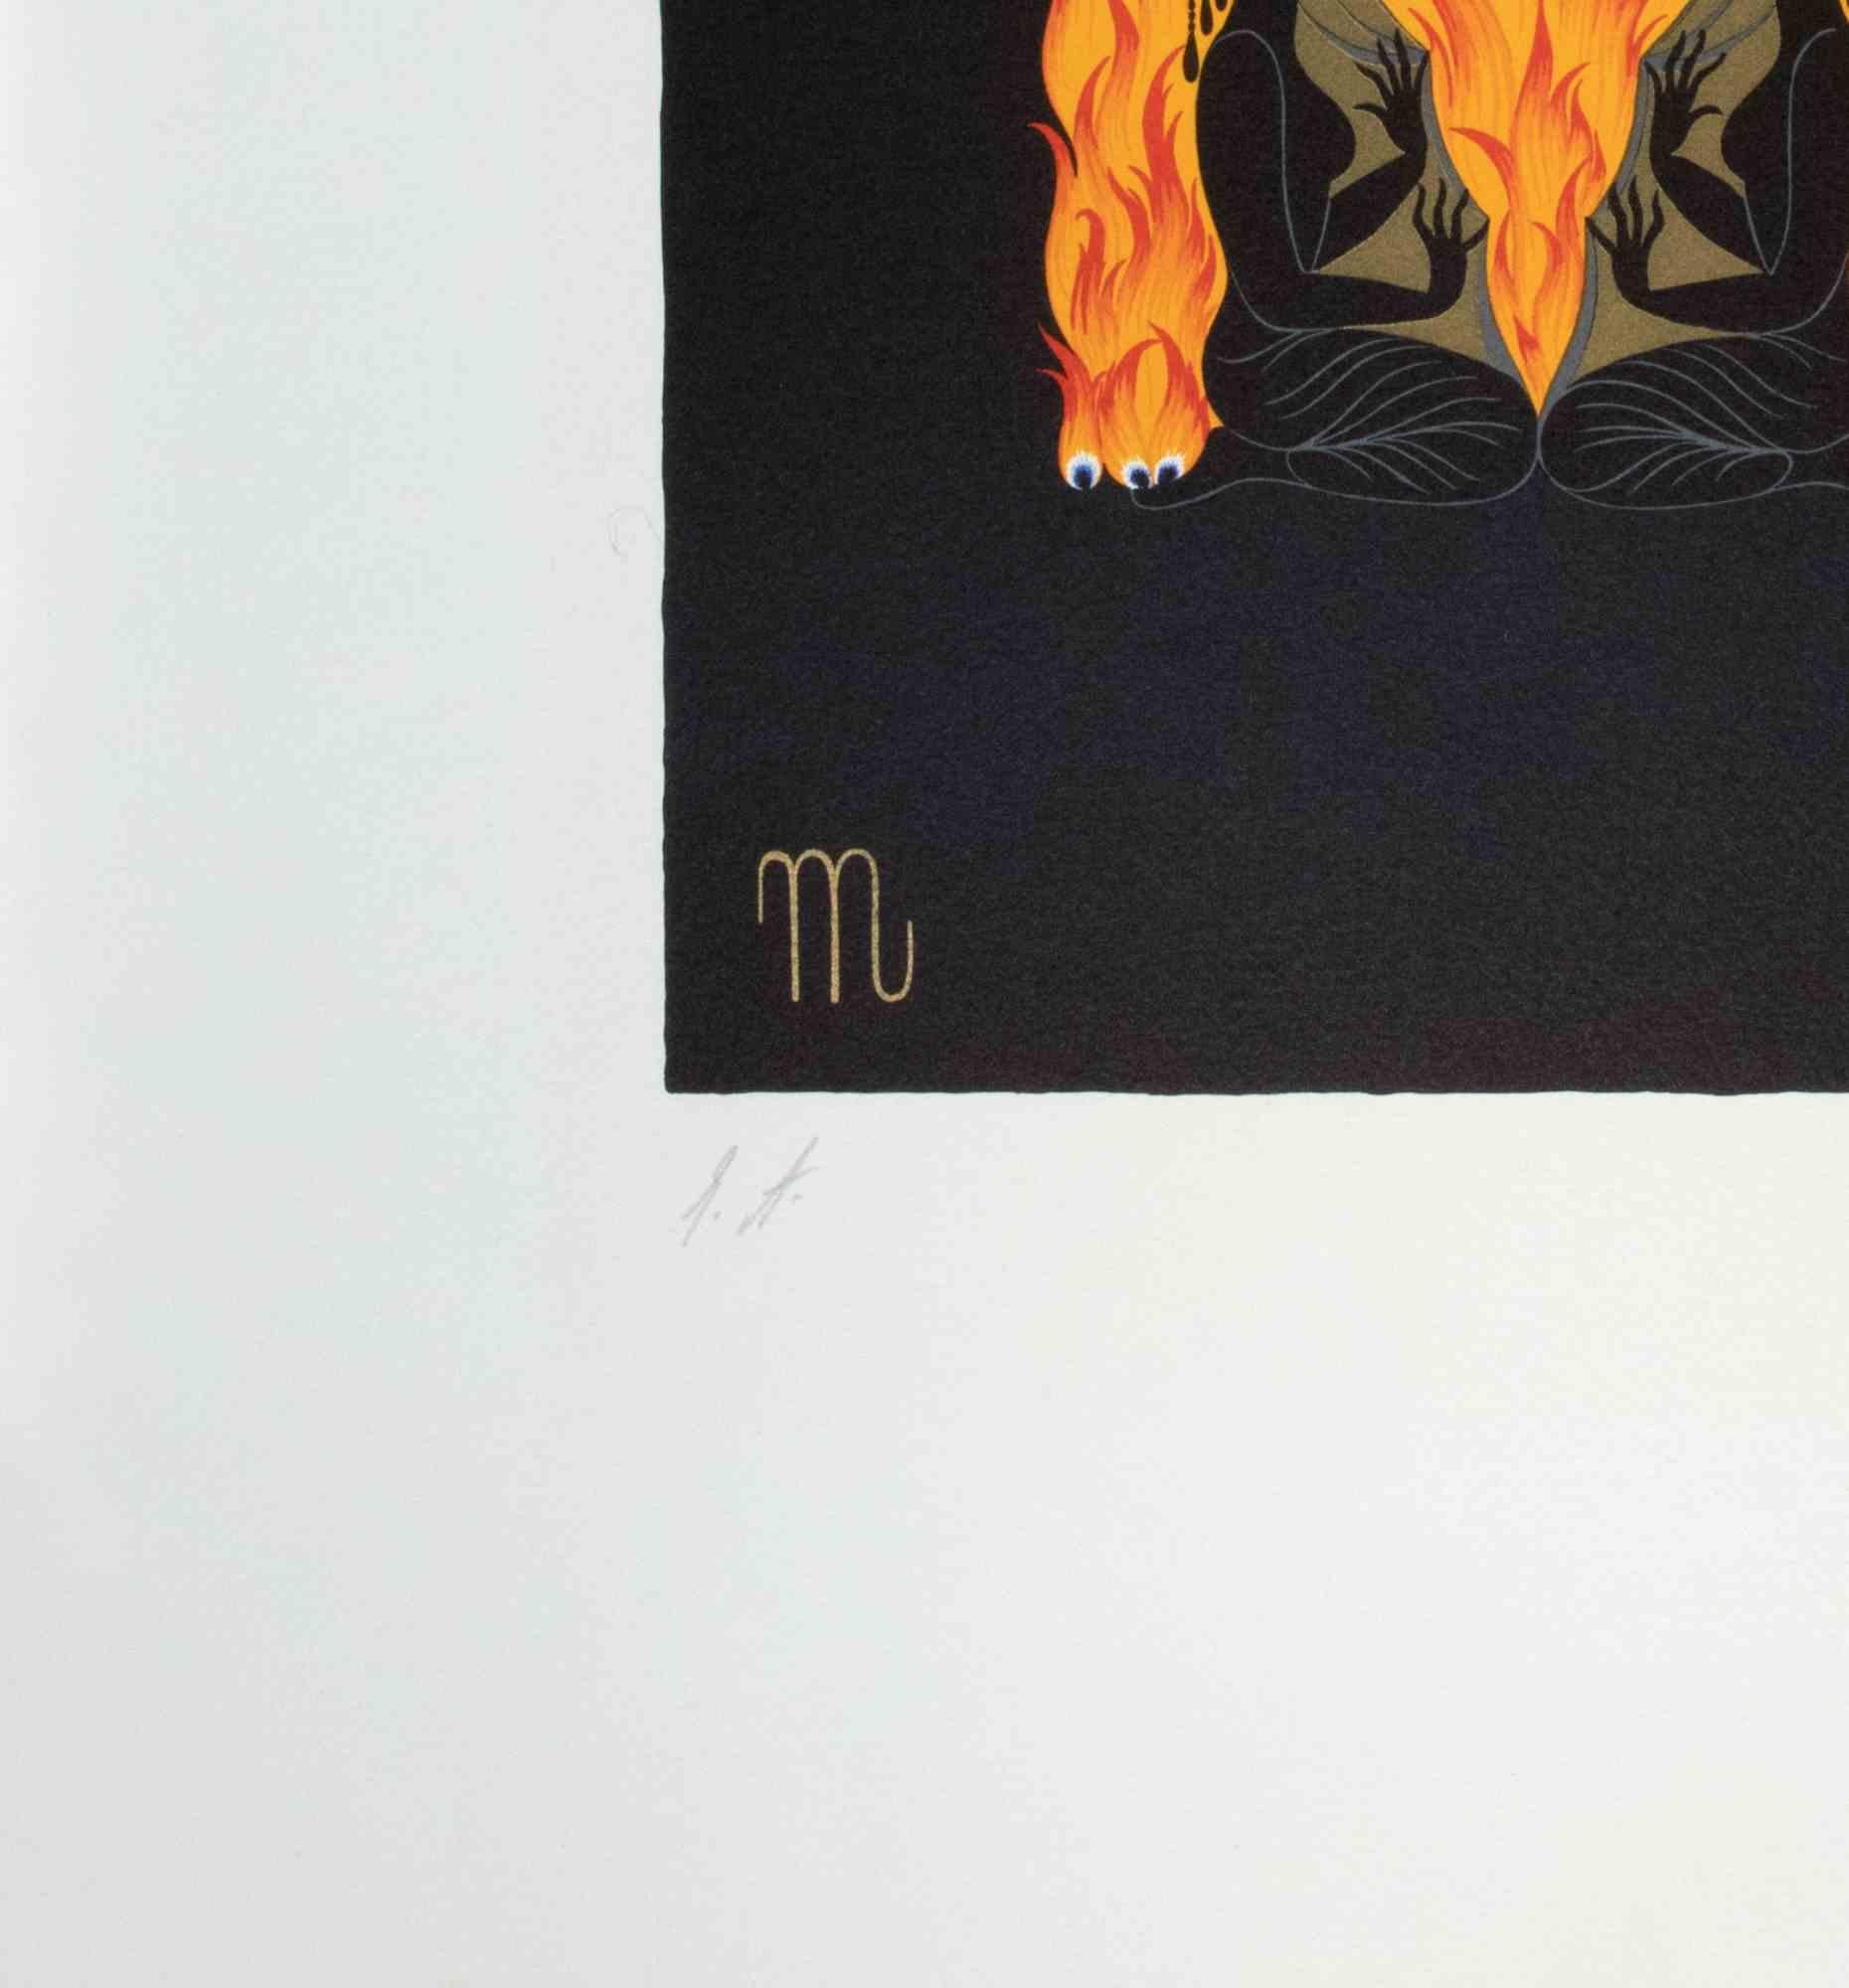 Letter M- from the suite Letters of the Alphabet is a contemporary artwork realized by Erté (Romain de Tirtoff).

Lithograph and Screen Print.

The artwork is from the suite 